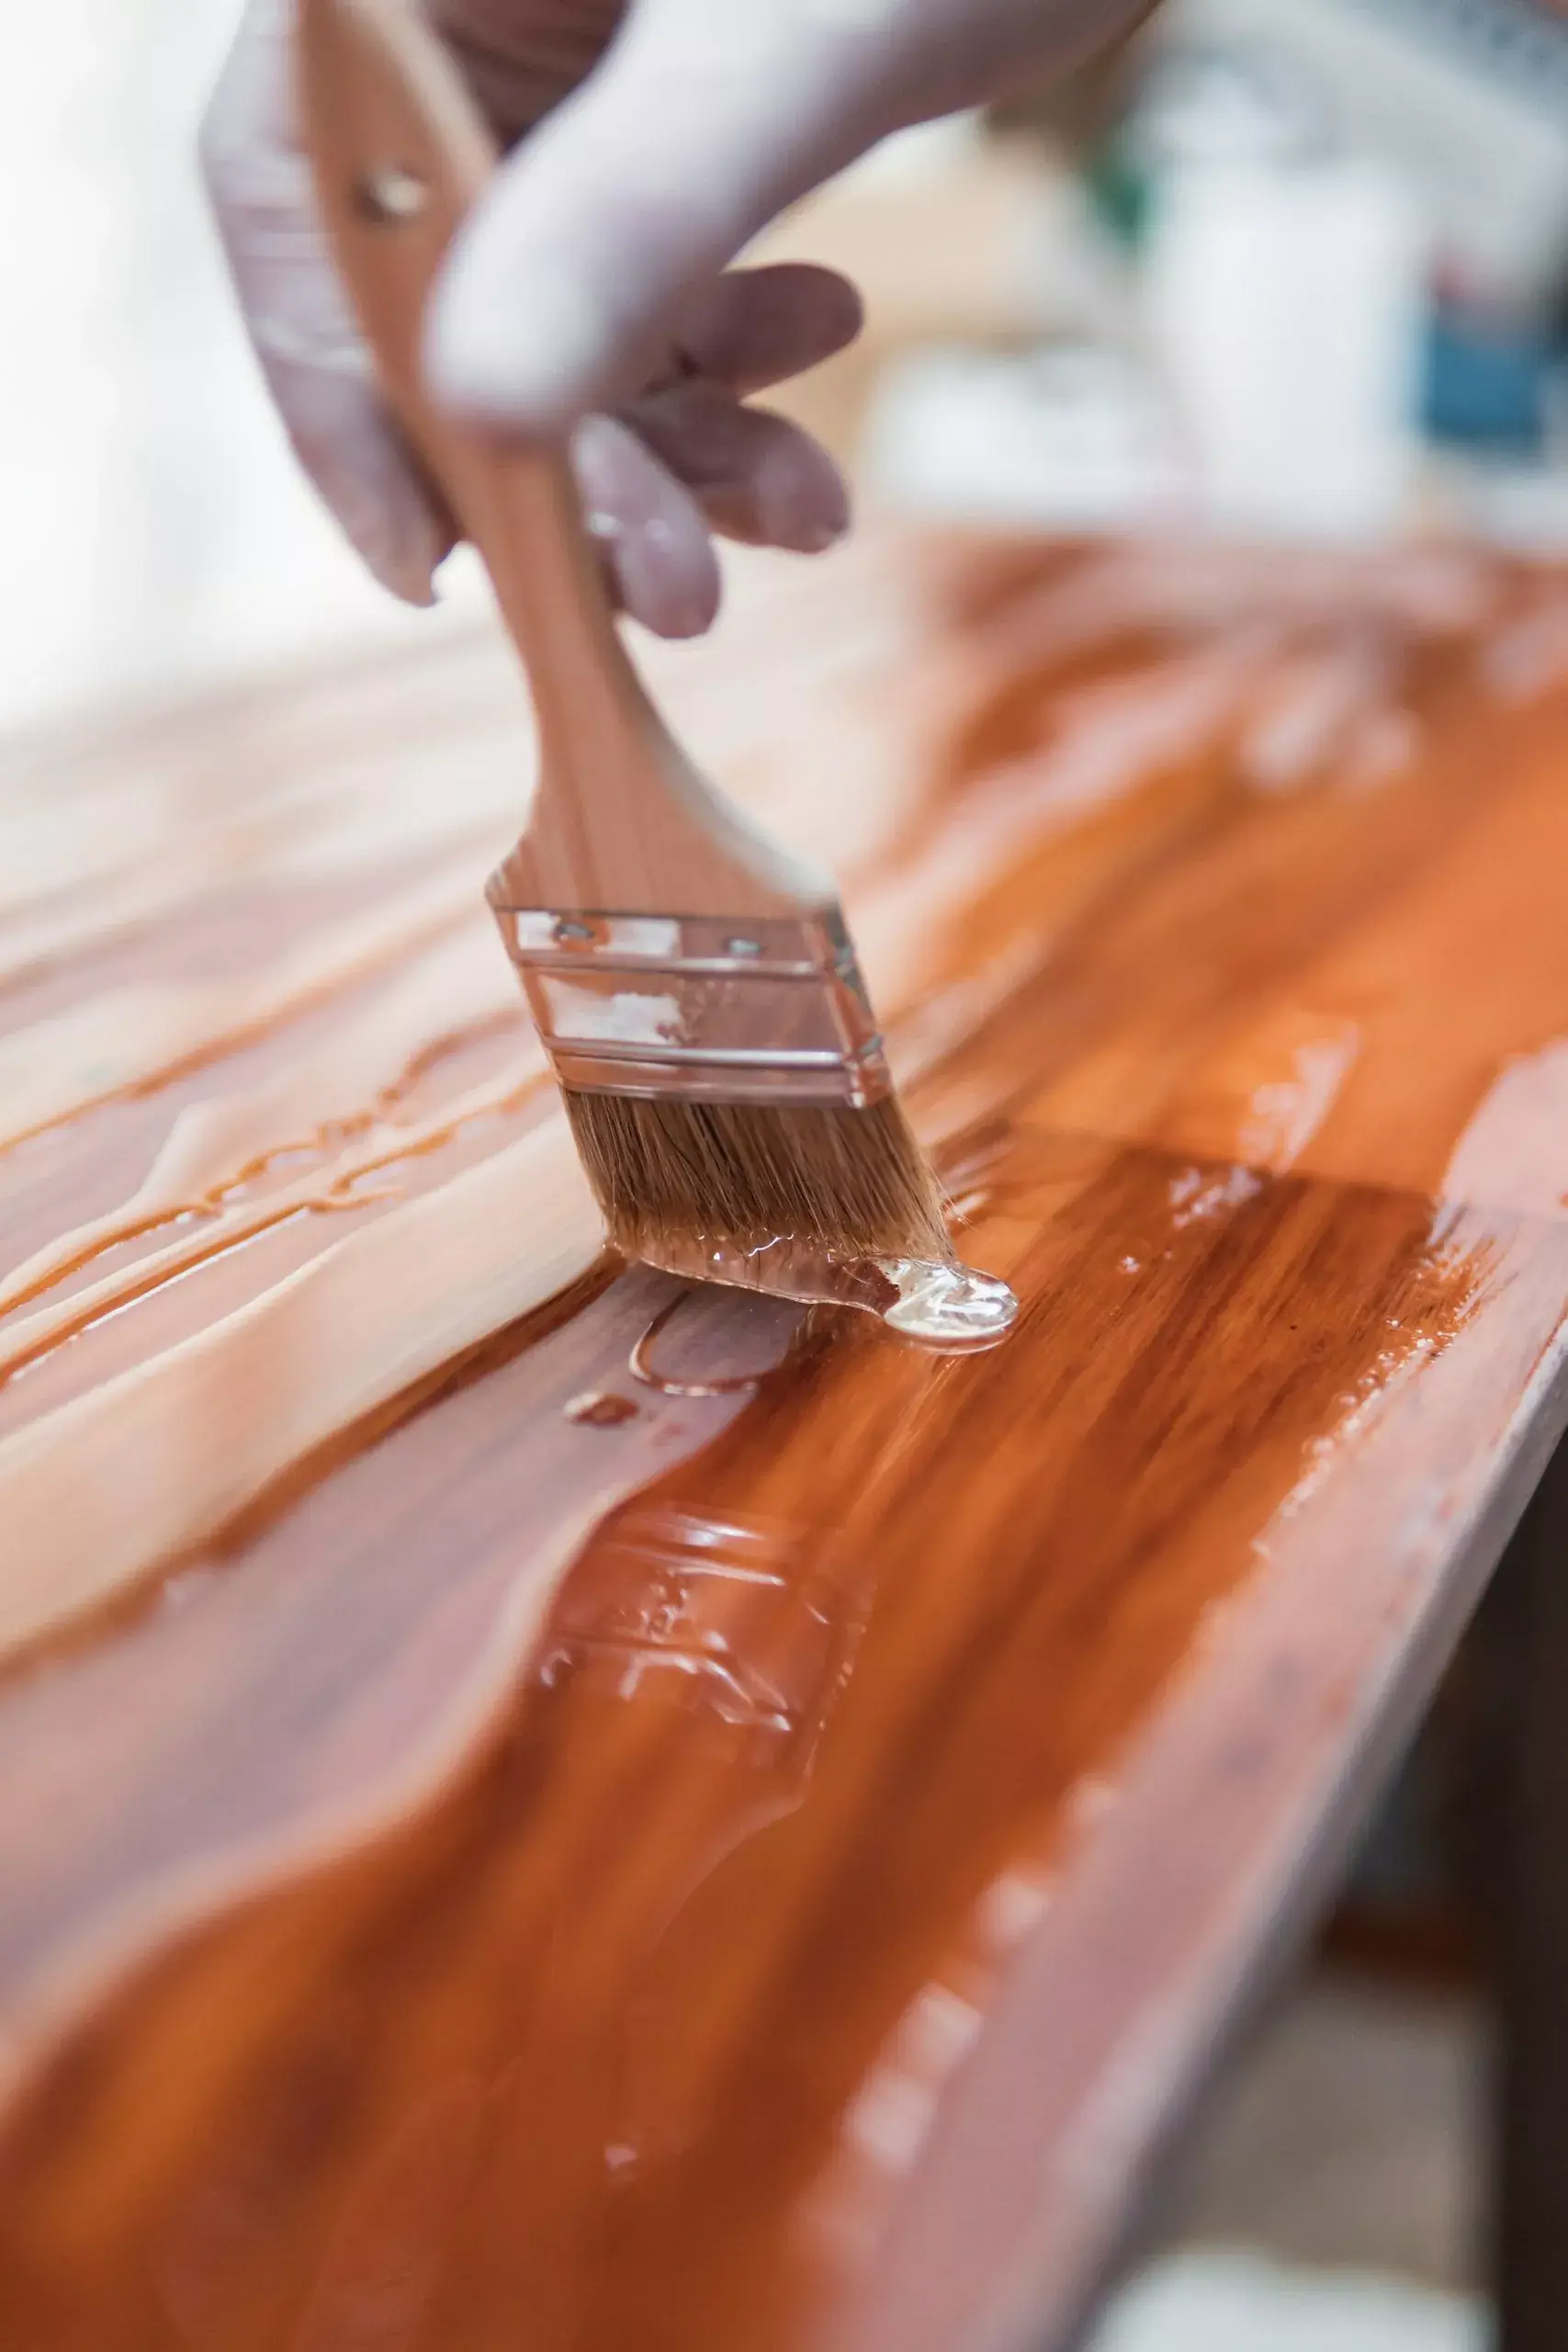 A hand adds varnish to a wooden surface with a paintbrush